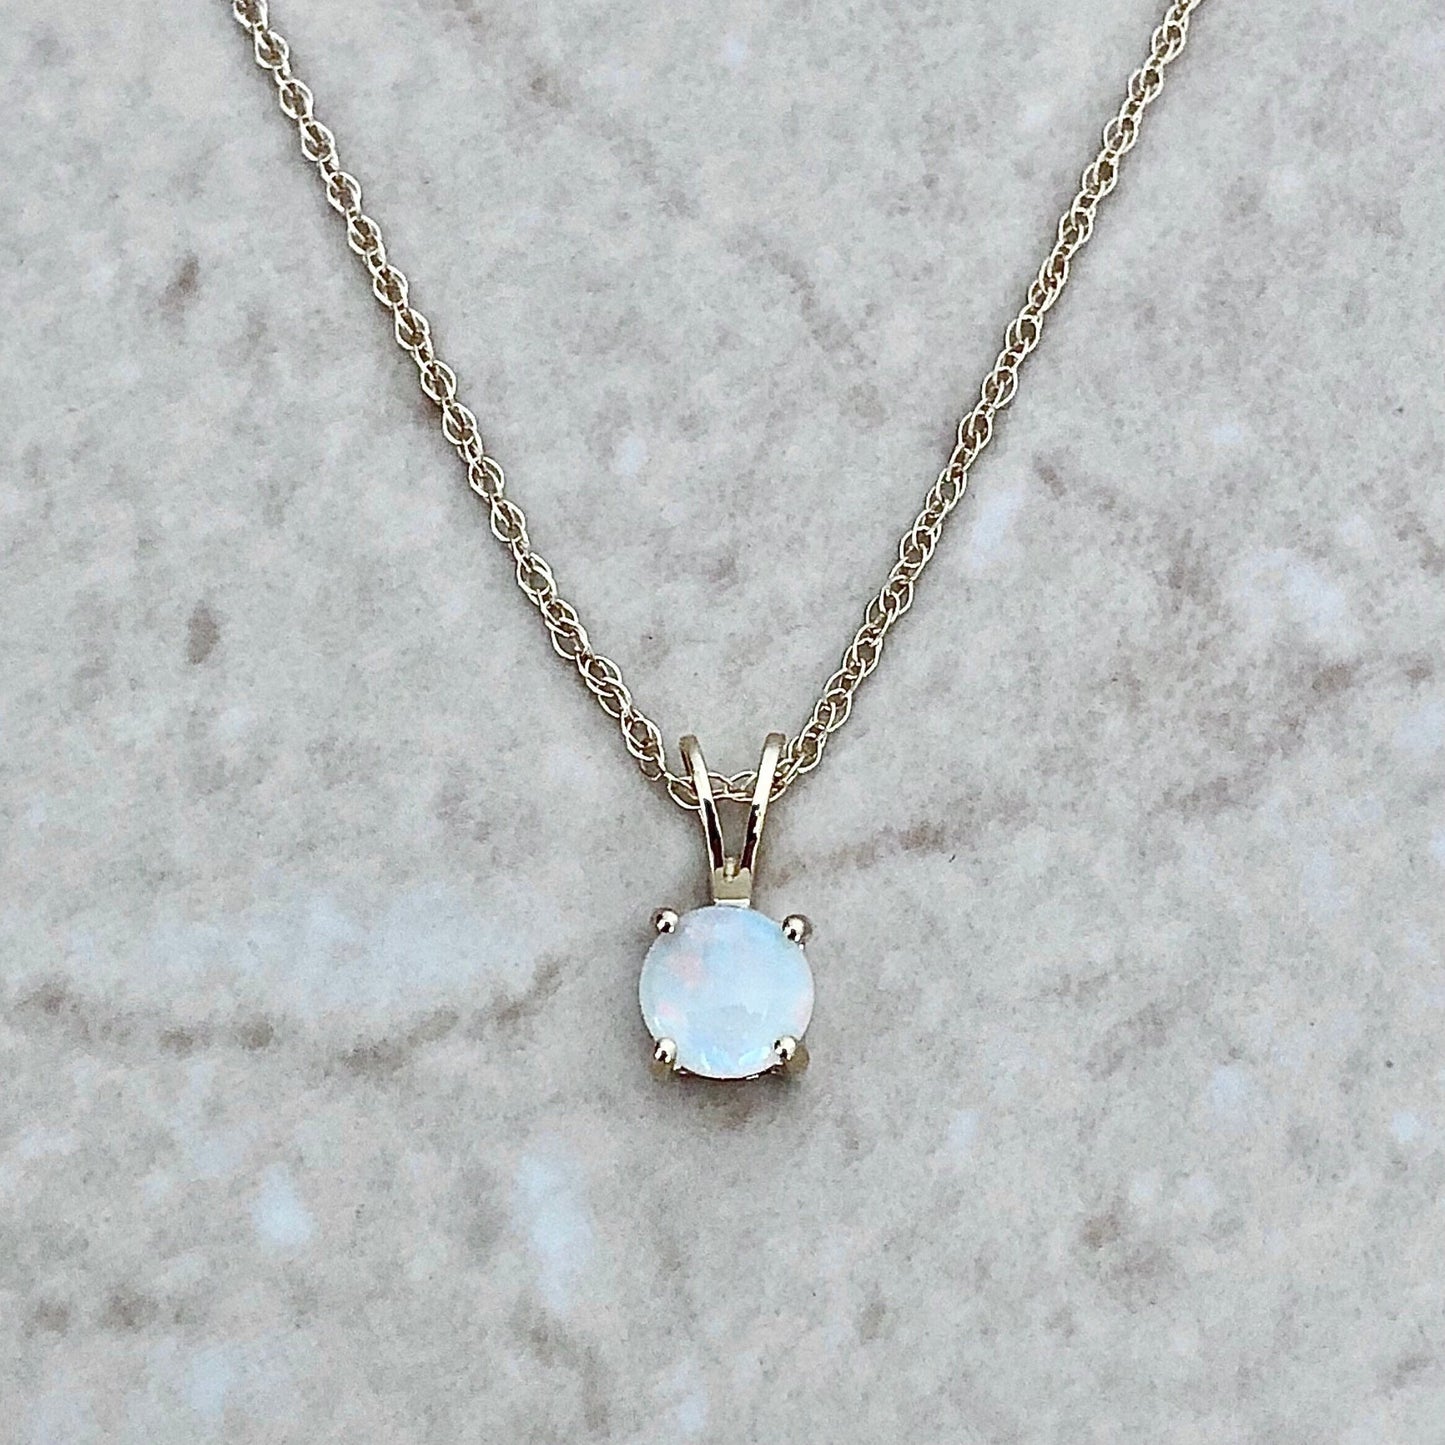 14K Round Opal Pendant Necklace - Yellow Gold Opal Necklace - Genuine Opal Solitaire Necklace - October Birthstone - Birthday Gift For Her